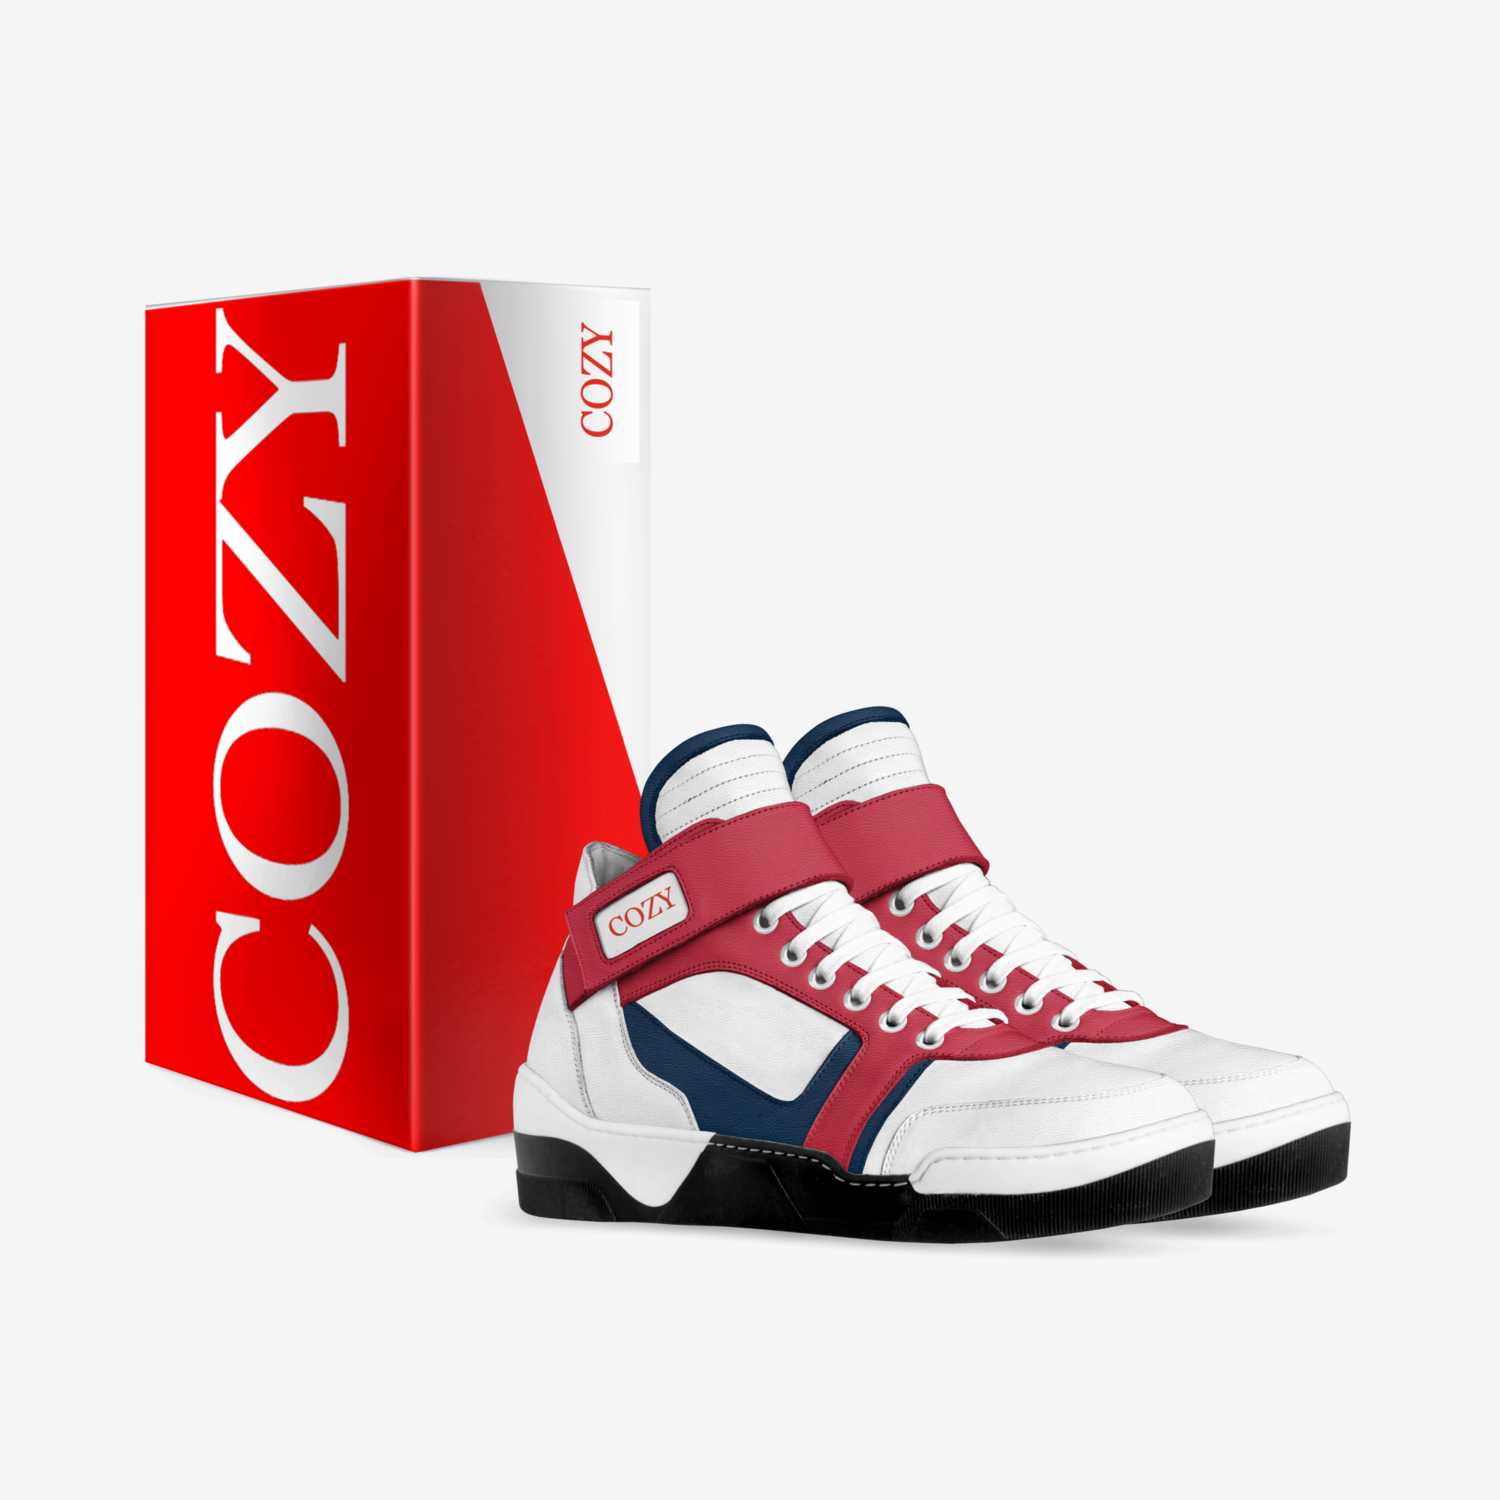 COZY KICKS WHRB custom made in Italy shoes by Charles Mcusa | Box view